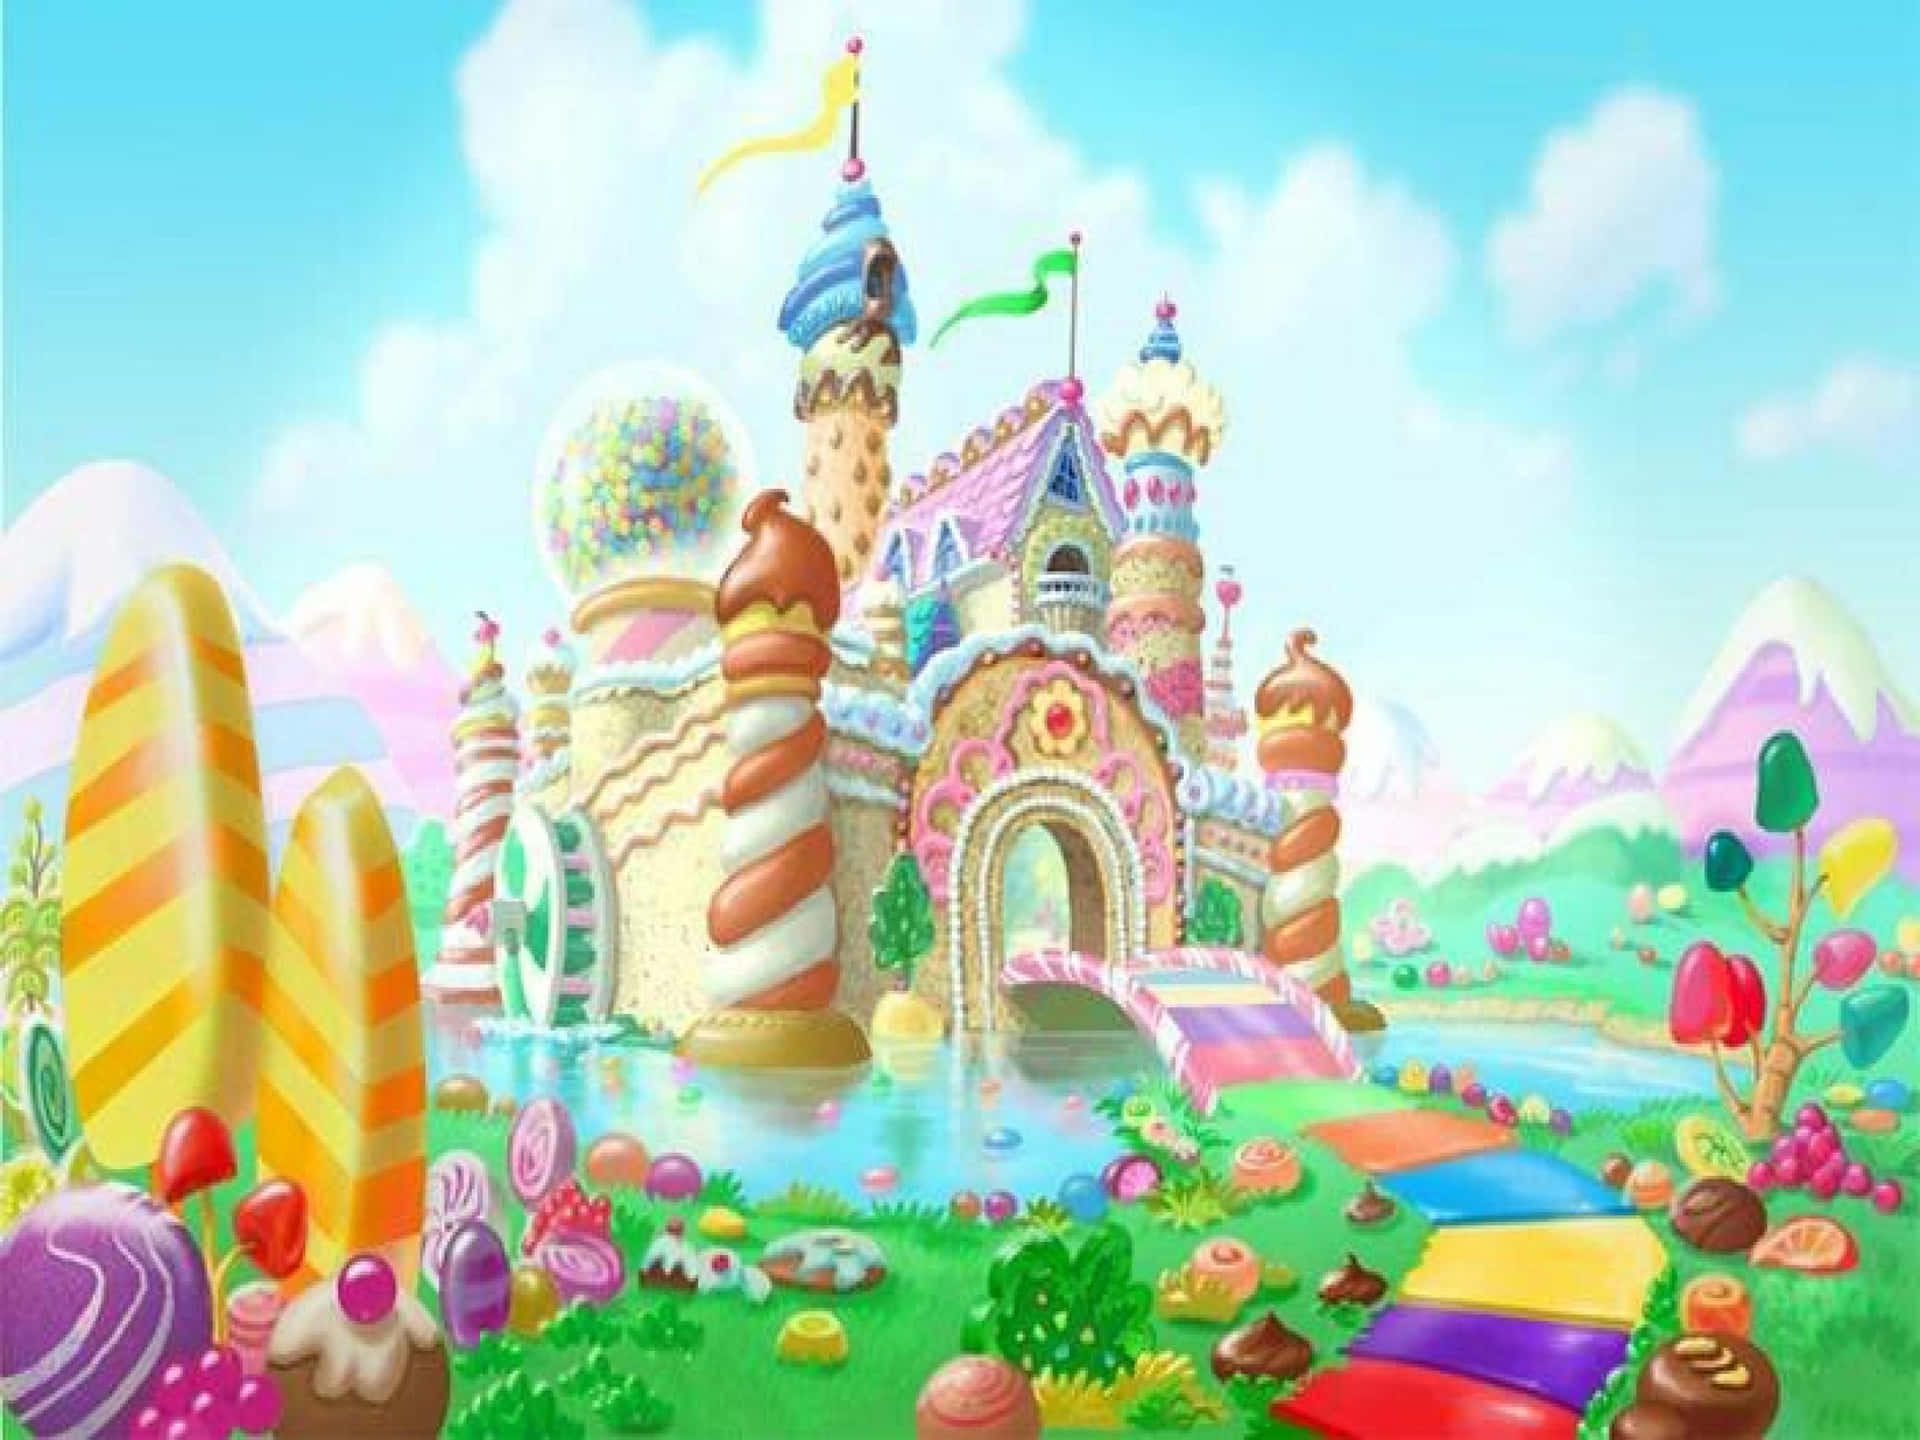 "Welcome to Candyland - Where Sweet Dreams are Made"